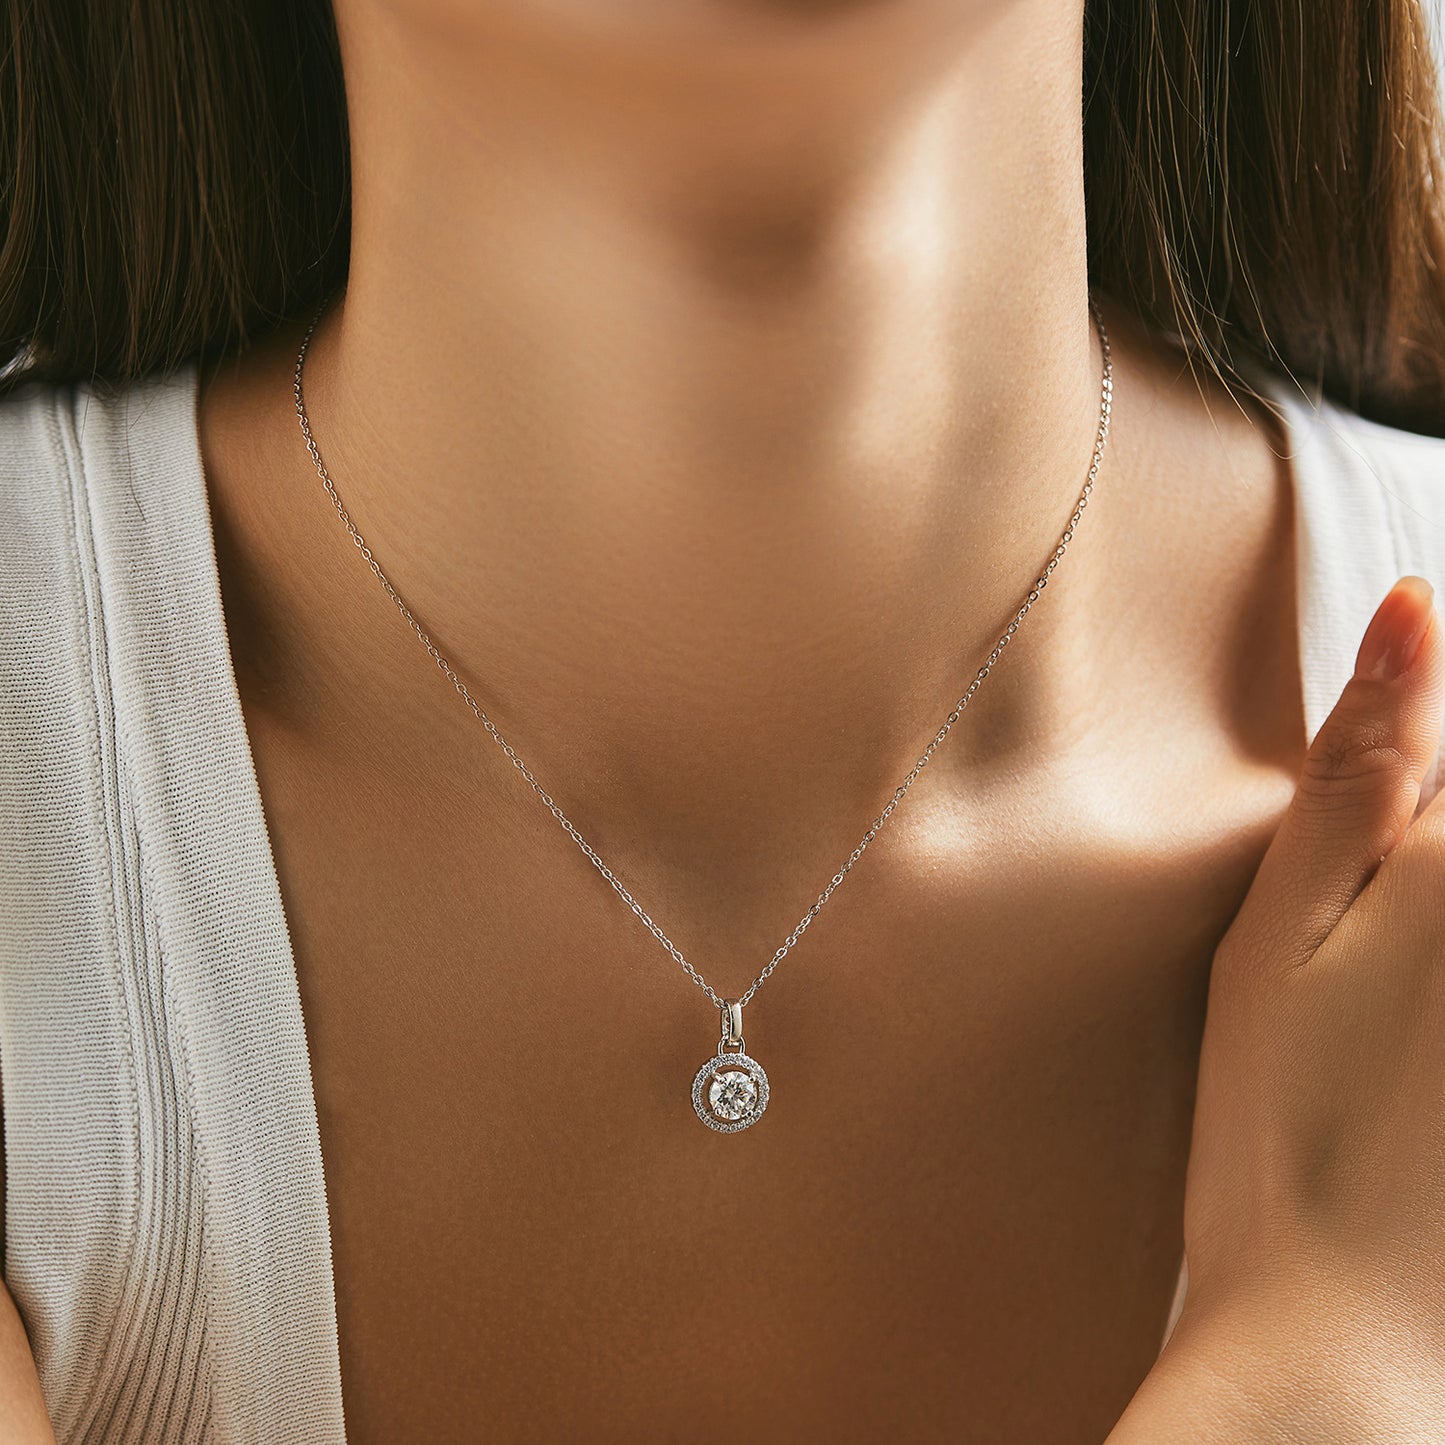 Luxurious French Pendant Necklace with 1 Carat Moissanite in Sterling Silver